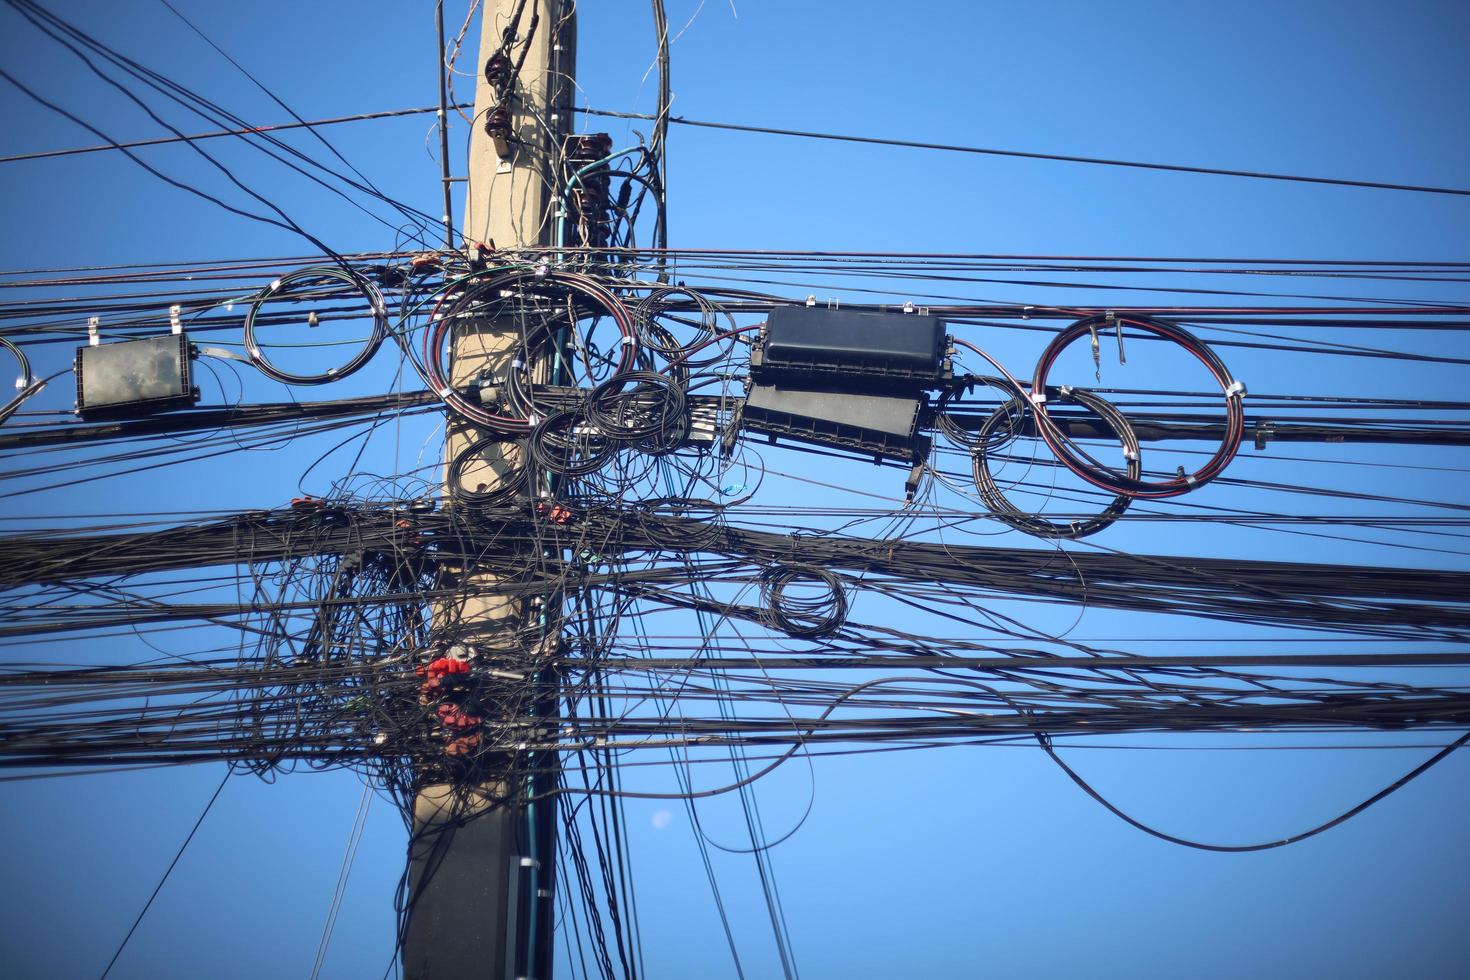 Many electrical and communication cables are entangled in a mess on the power poles. Confusing and insecure concept to operate and manage the system photo